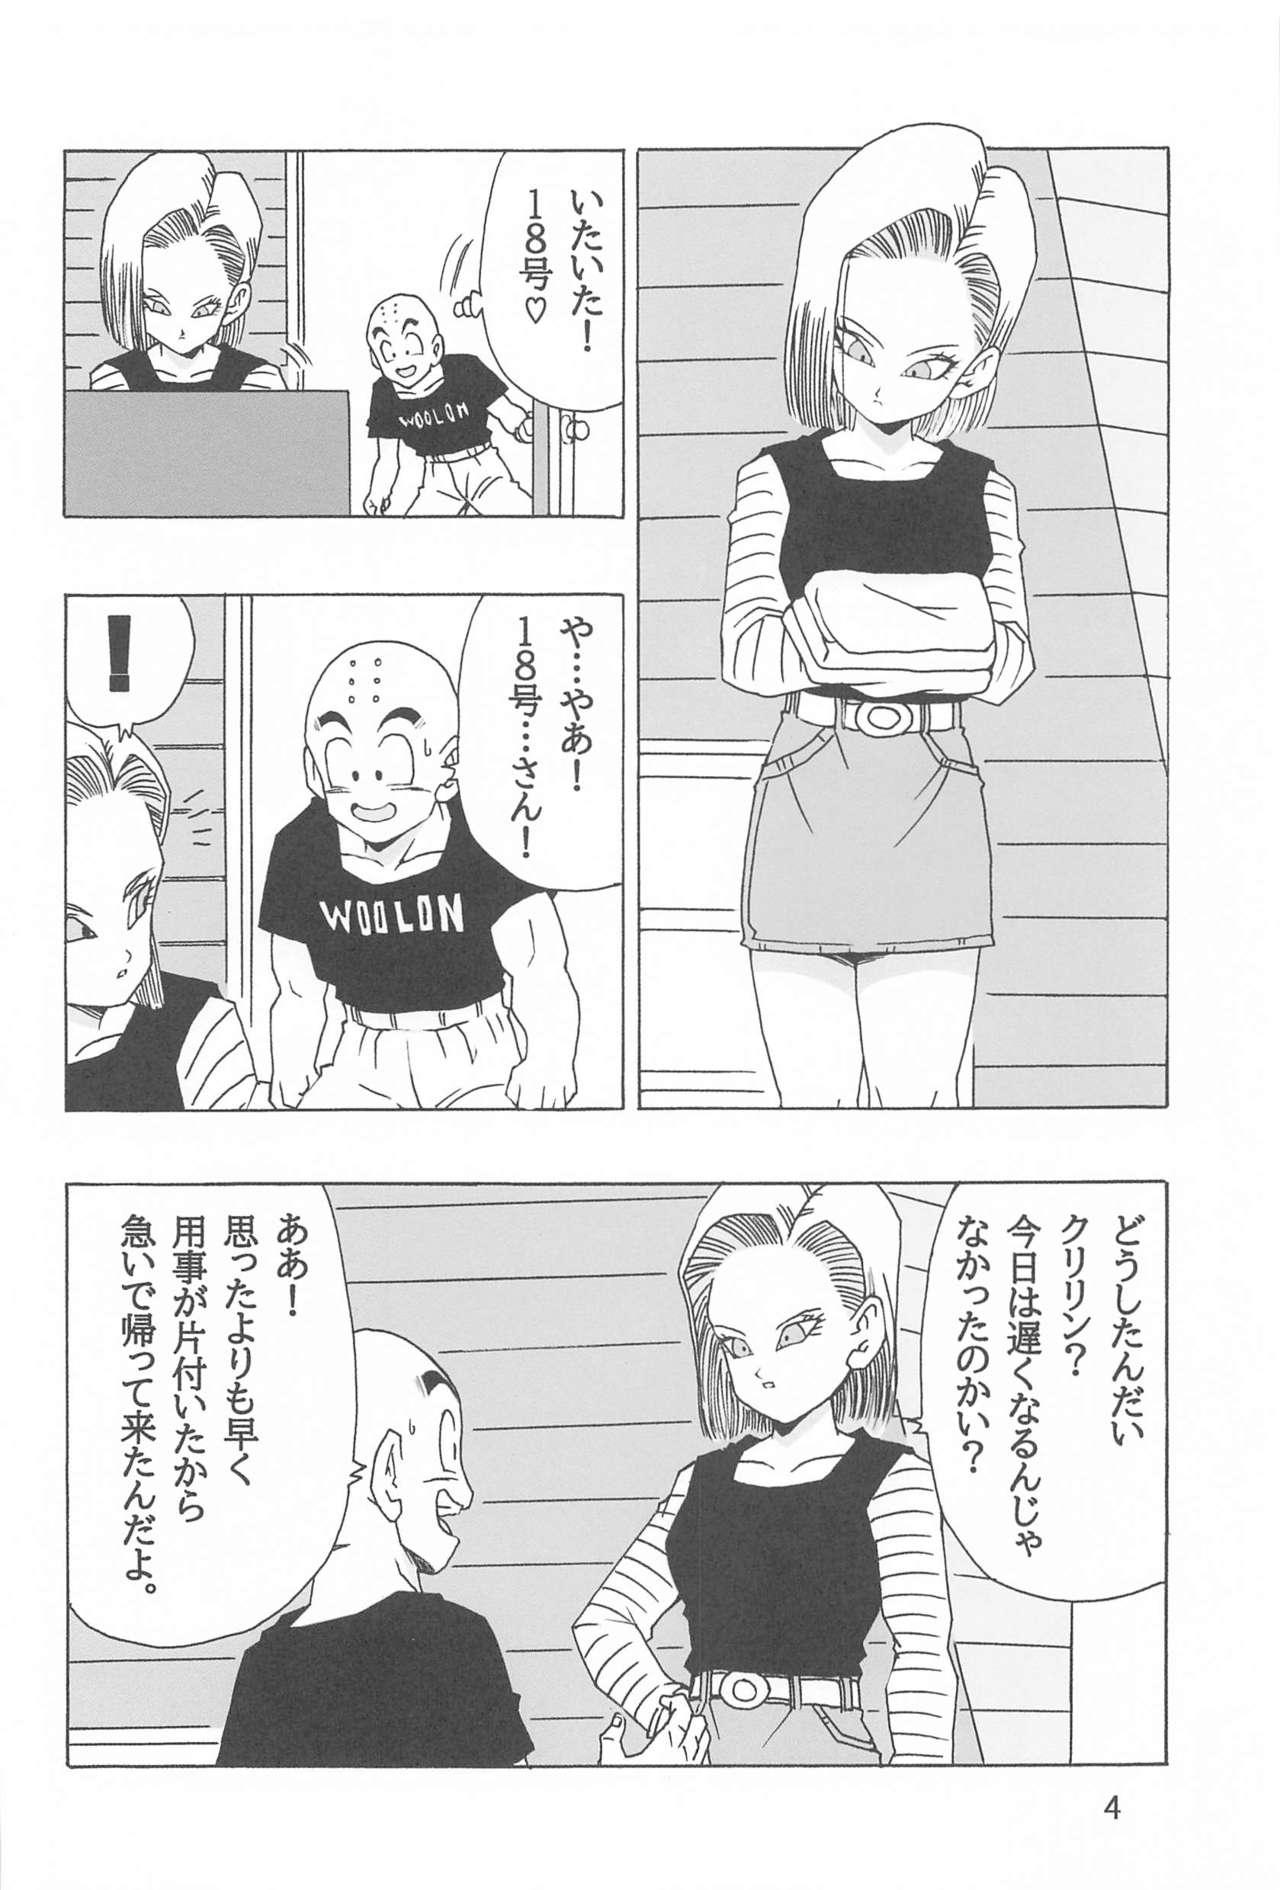 EPISODE OF ANDROID18 4